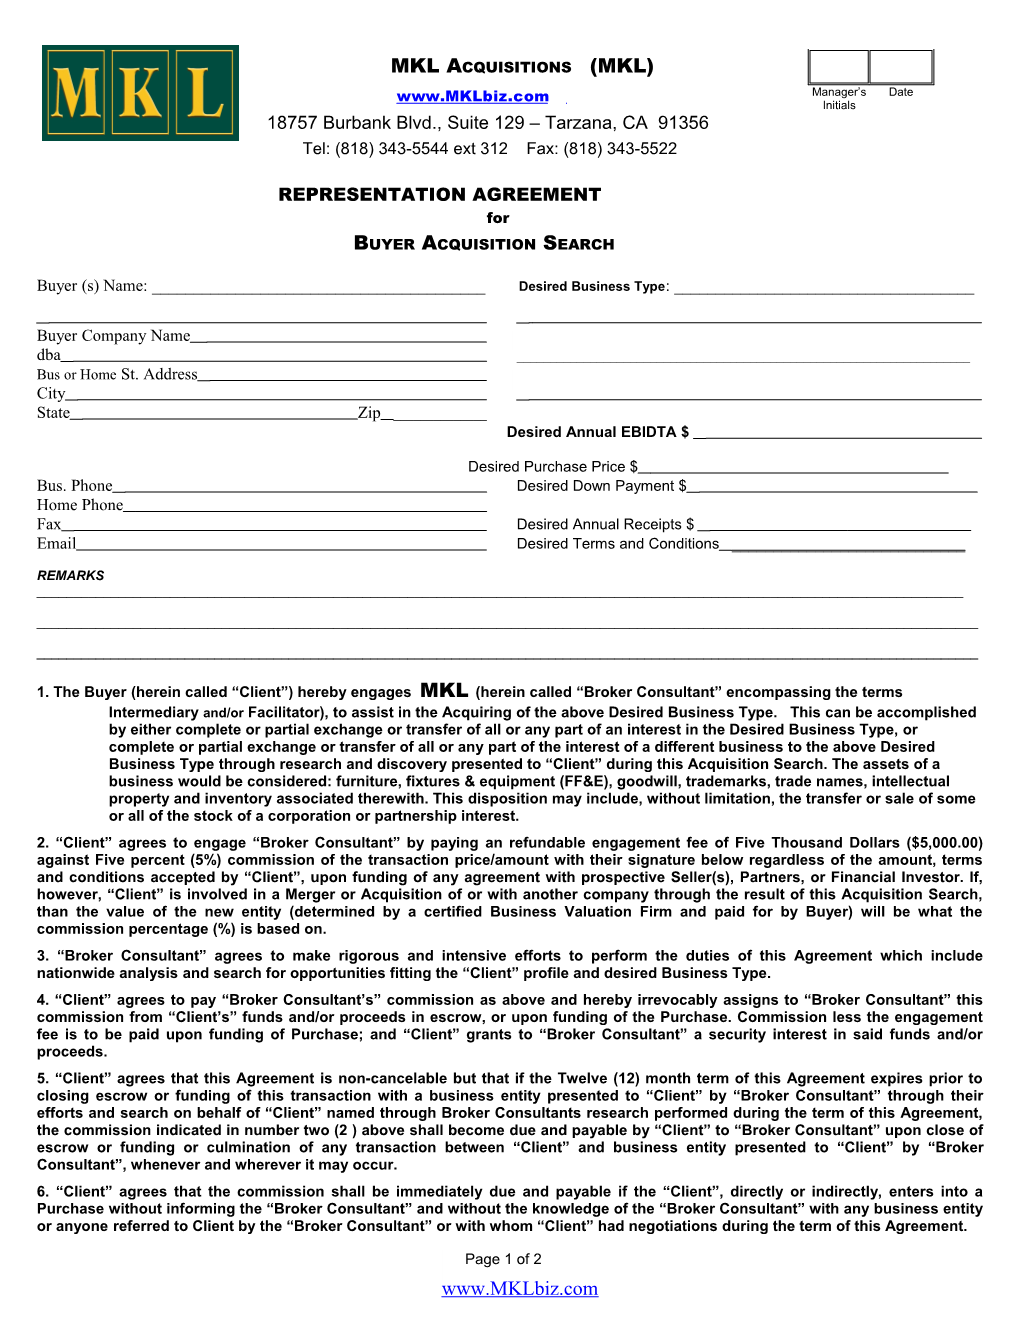 Acquisition Search Agreement